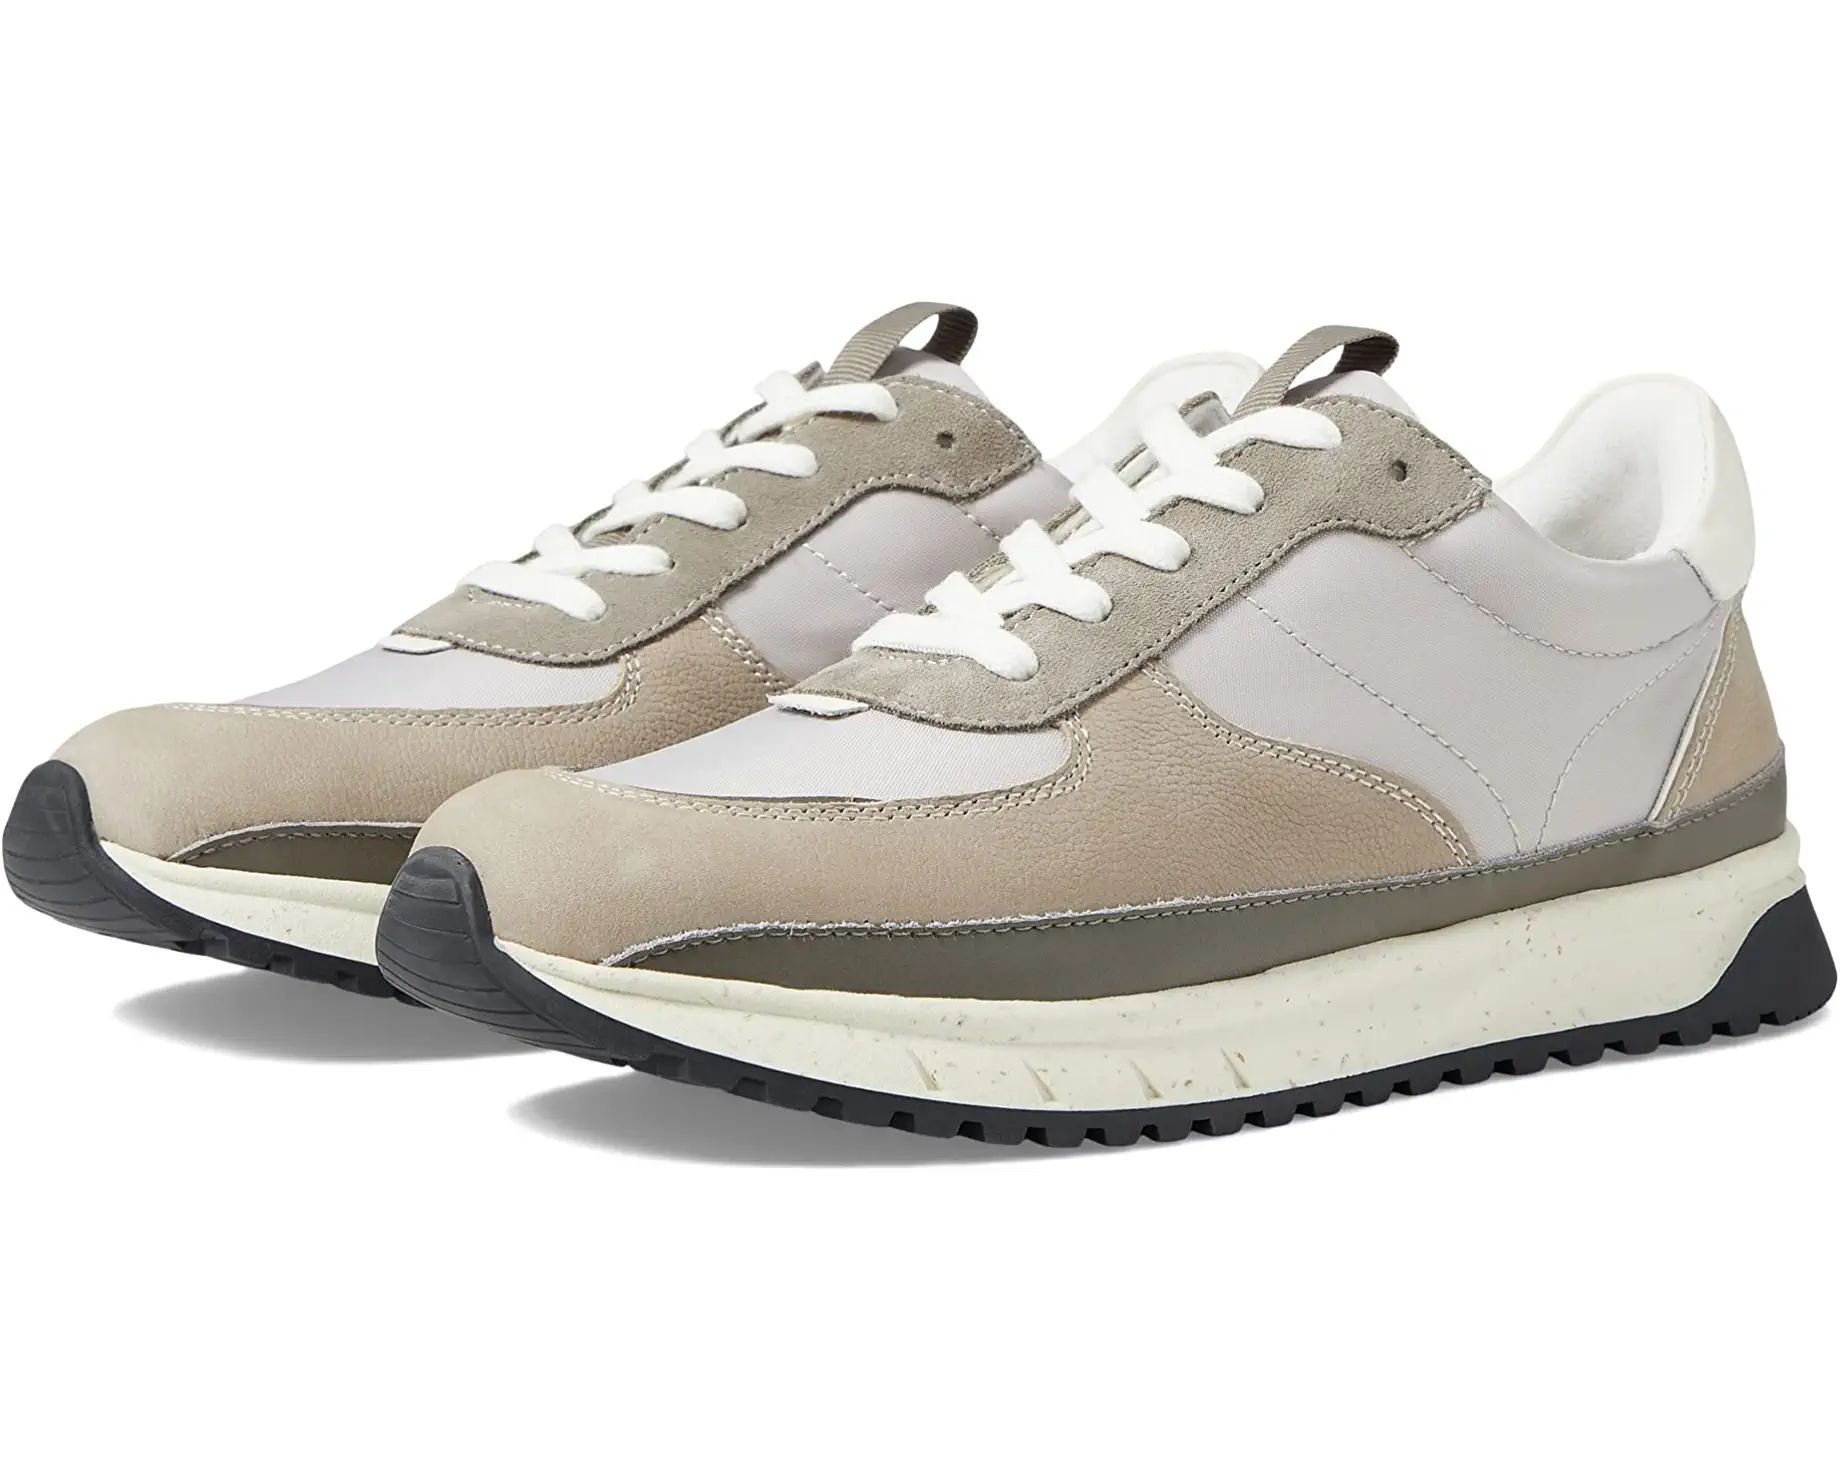 Kickoff Trainer Sneakers in Leather and (Re)sourced Nylon | Zappos